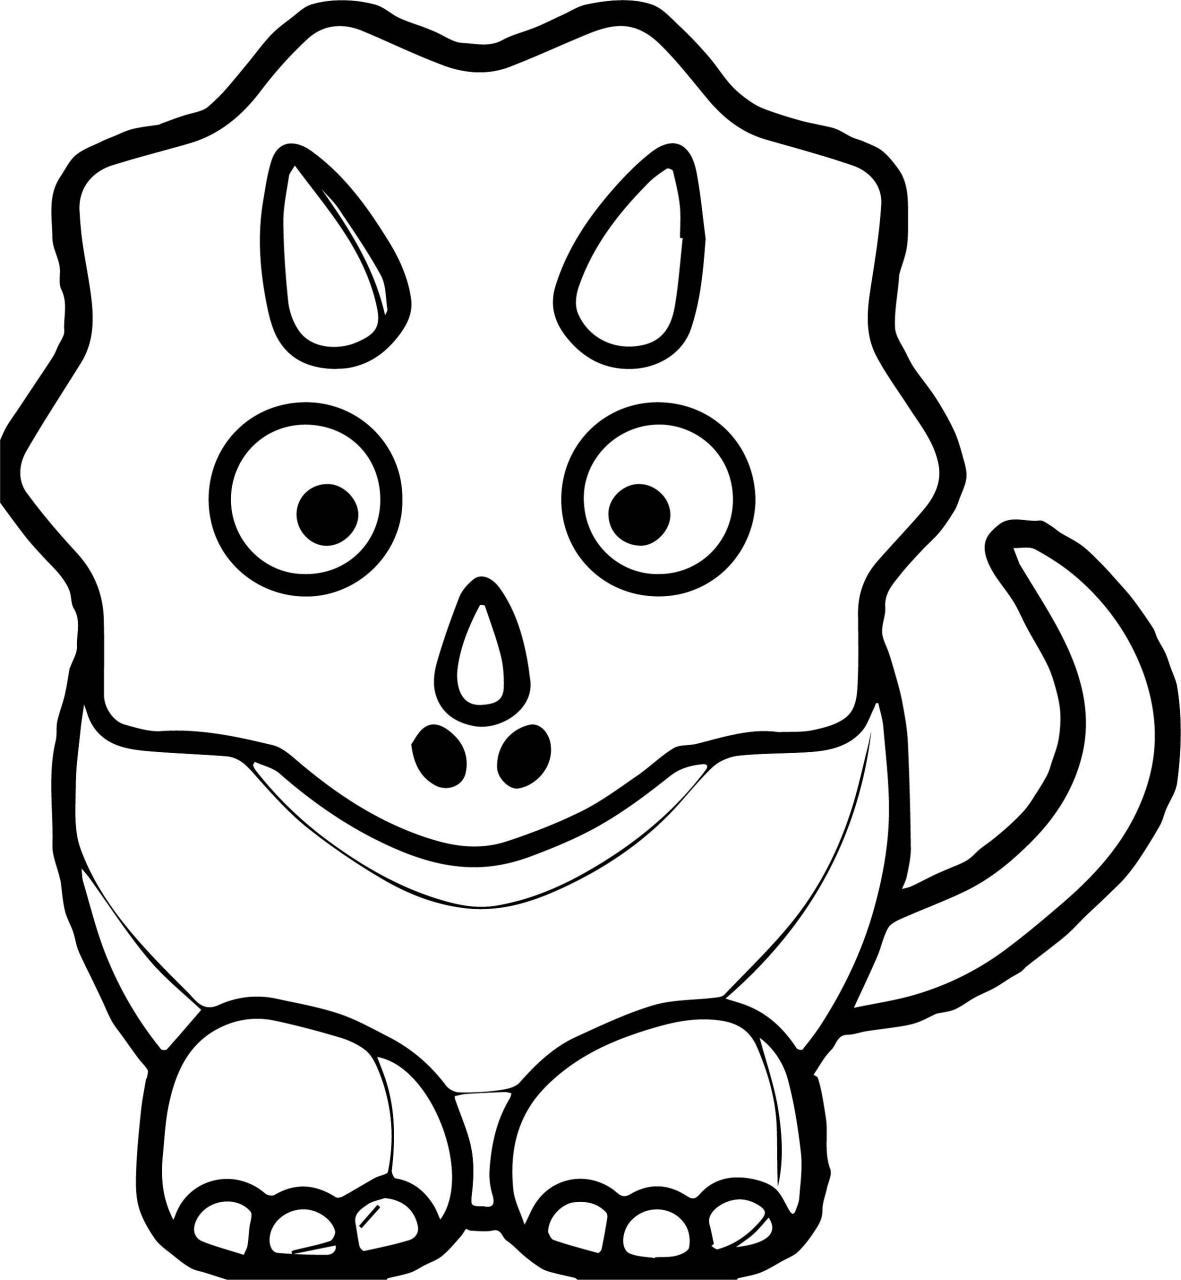 Baby Dinosaur Coloring Pages for Preschoolers Activity Shelter